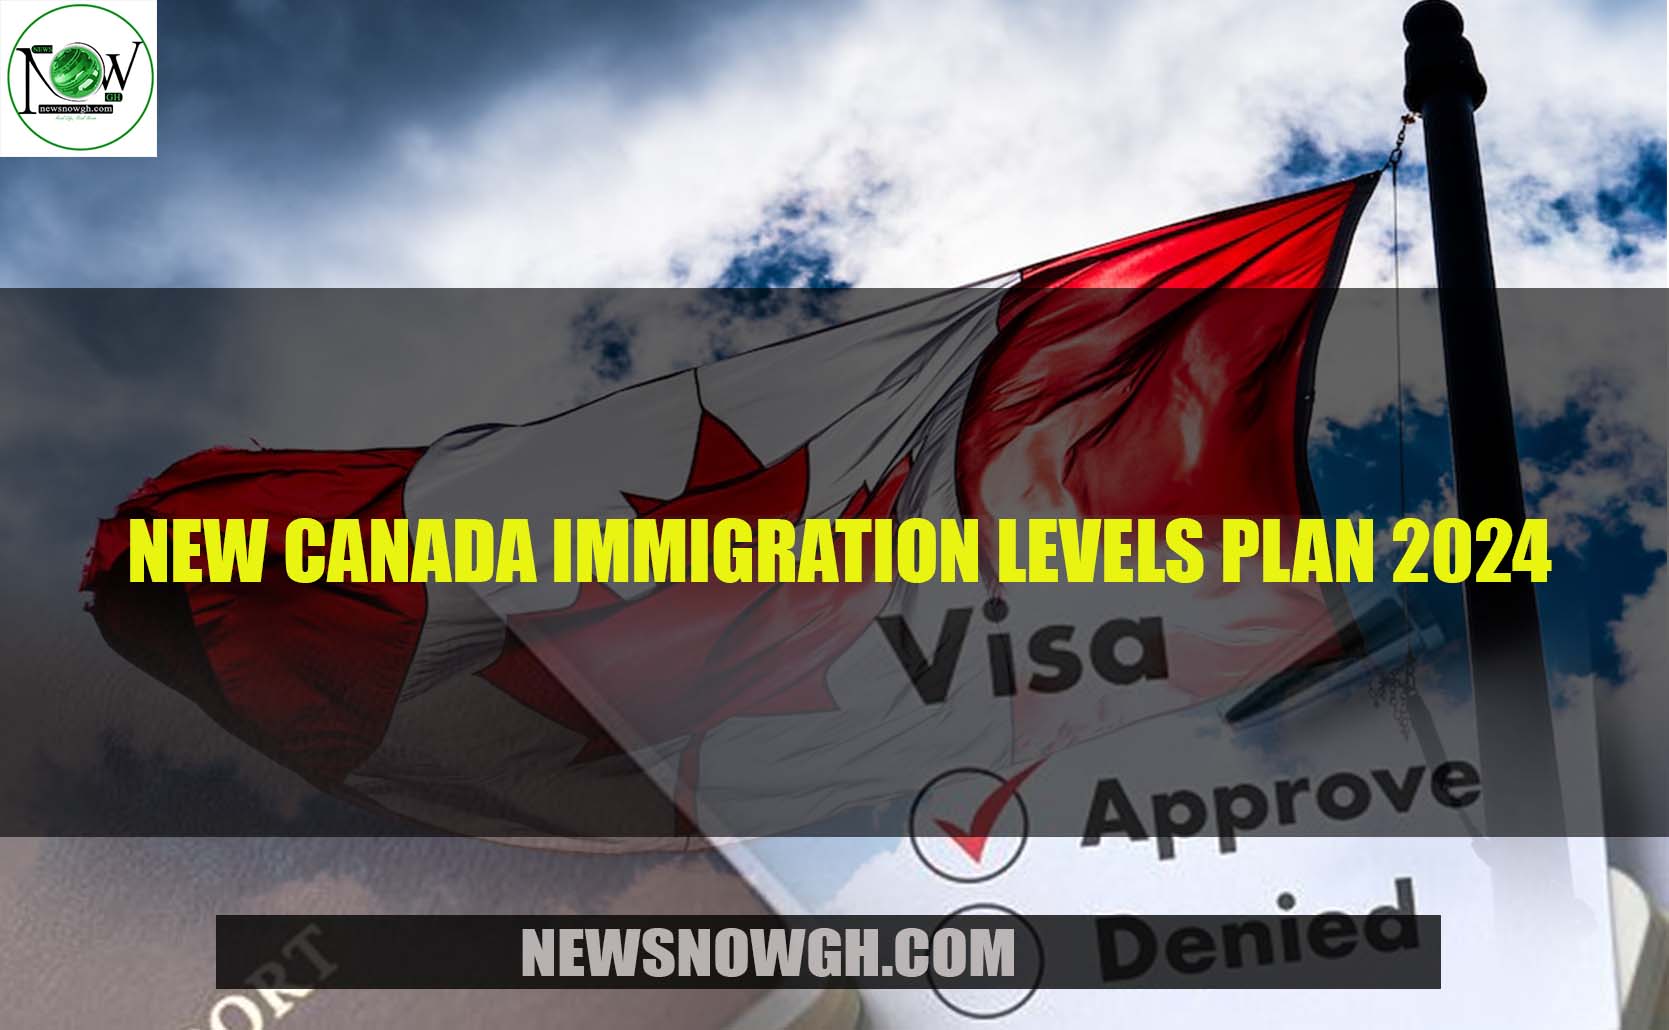 New Canada Immigration Levels Plan 2024 Announced